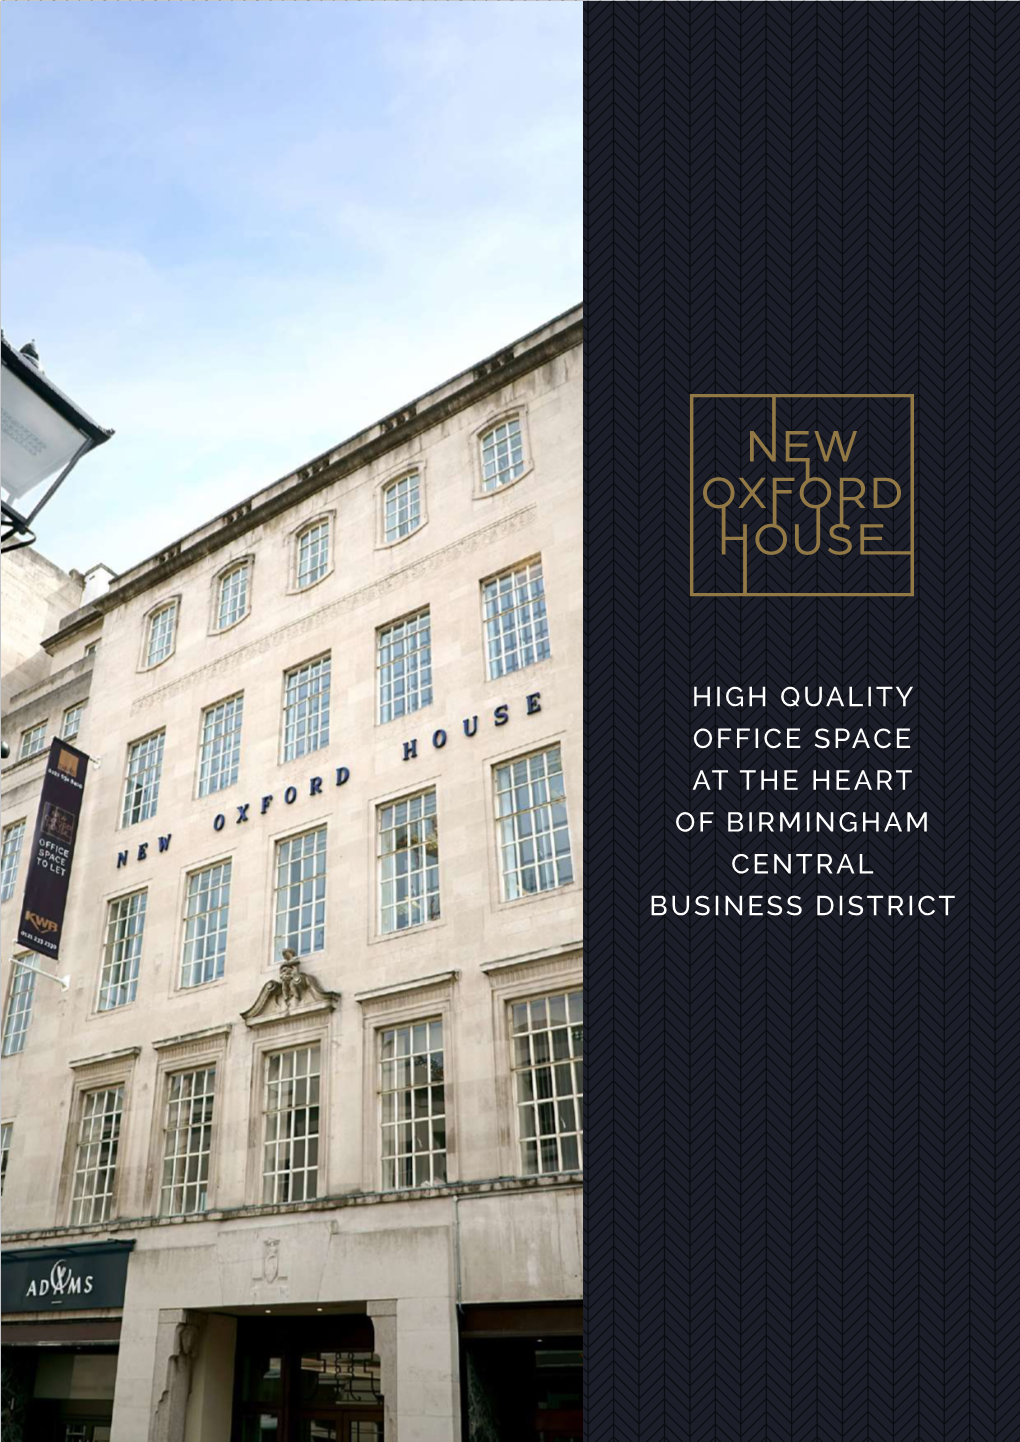 HIGH QUALITY OFFICE SPACE at the HEART of BIRMINGHAM CENTRAL BUSINESS DISTRICT Third Floor High Quality Office Space 3,608 SQ FT